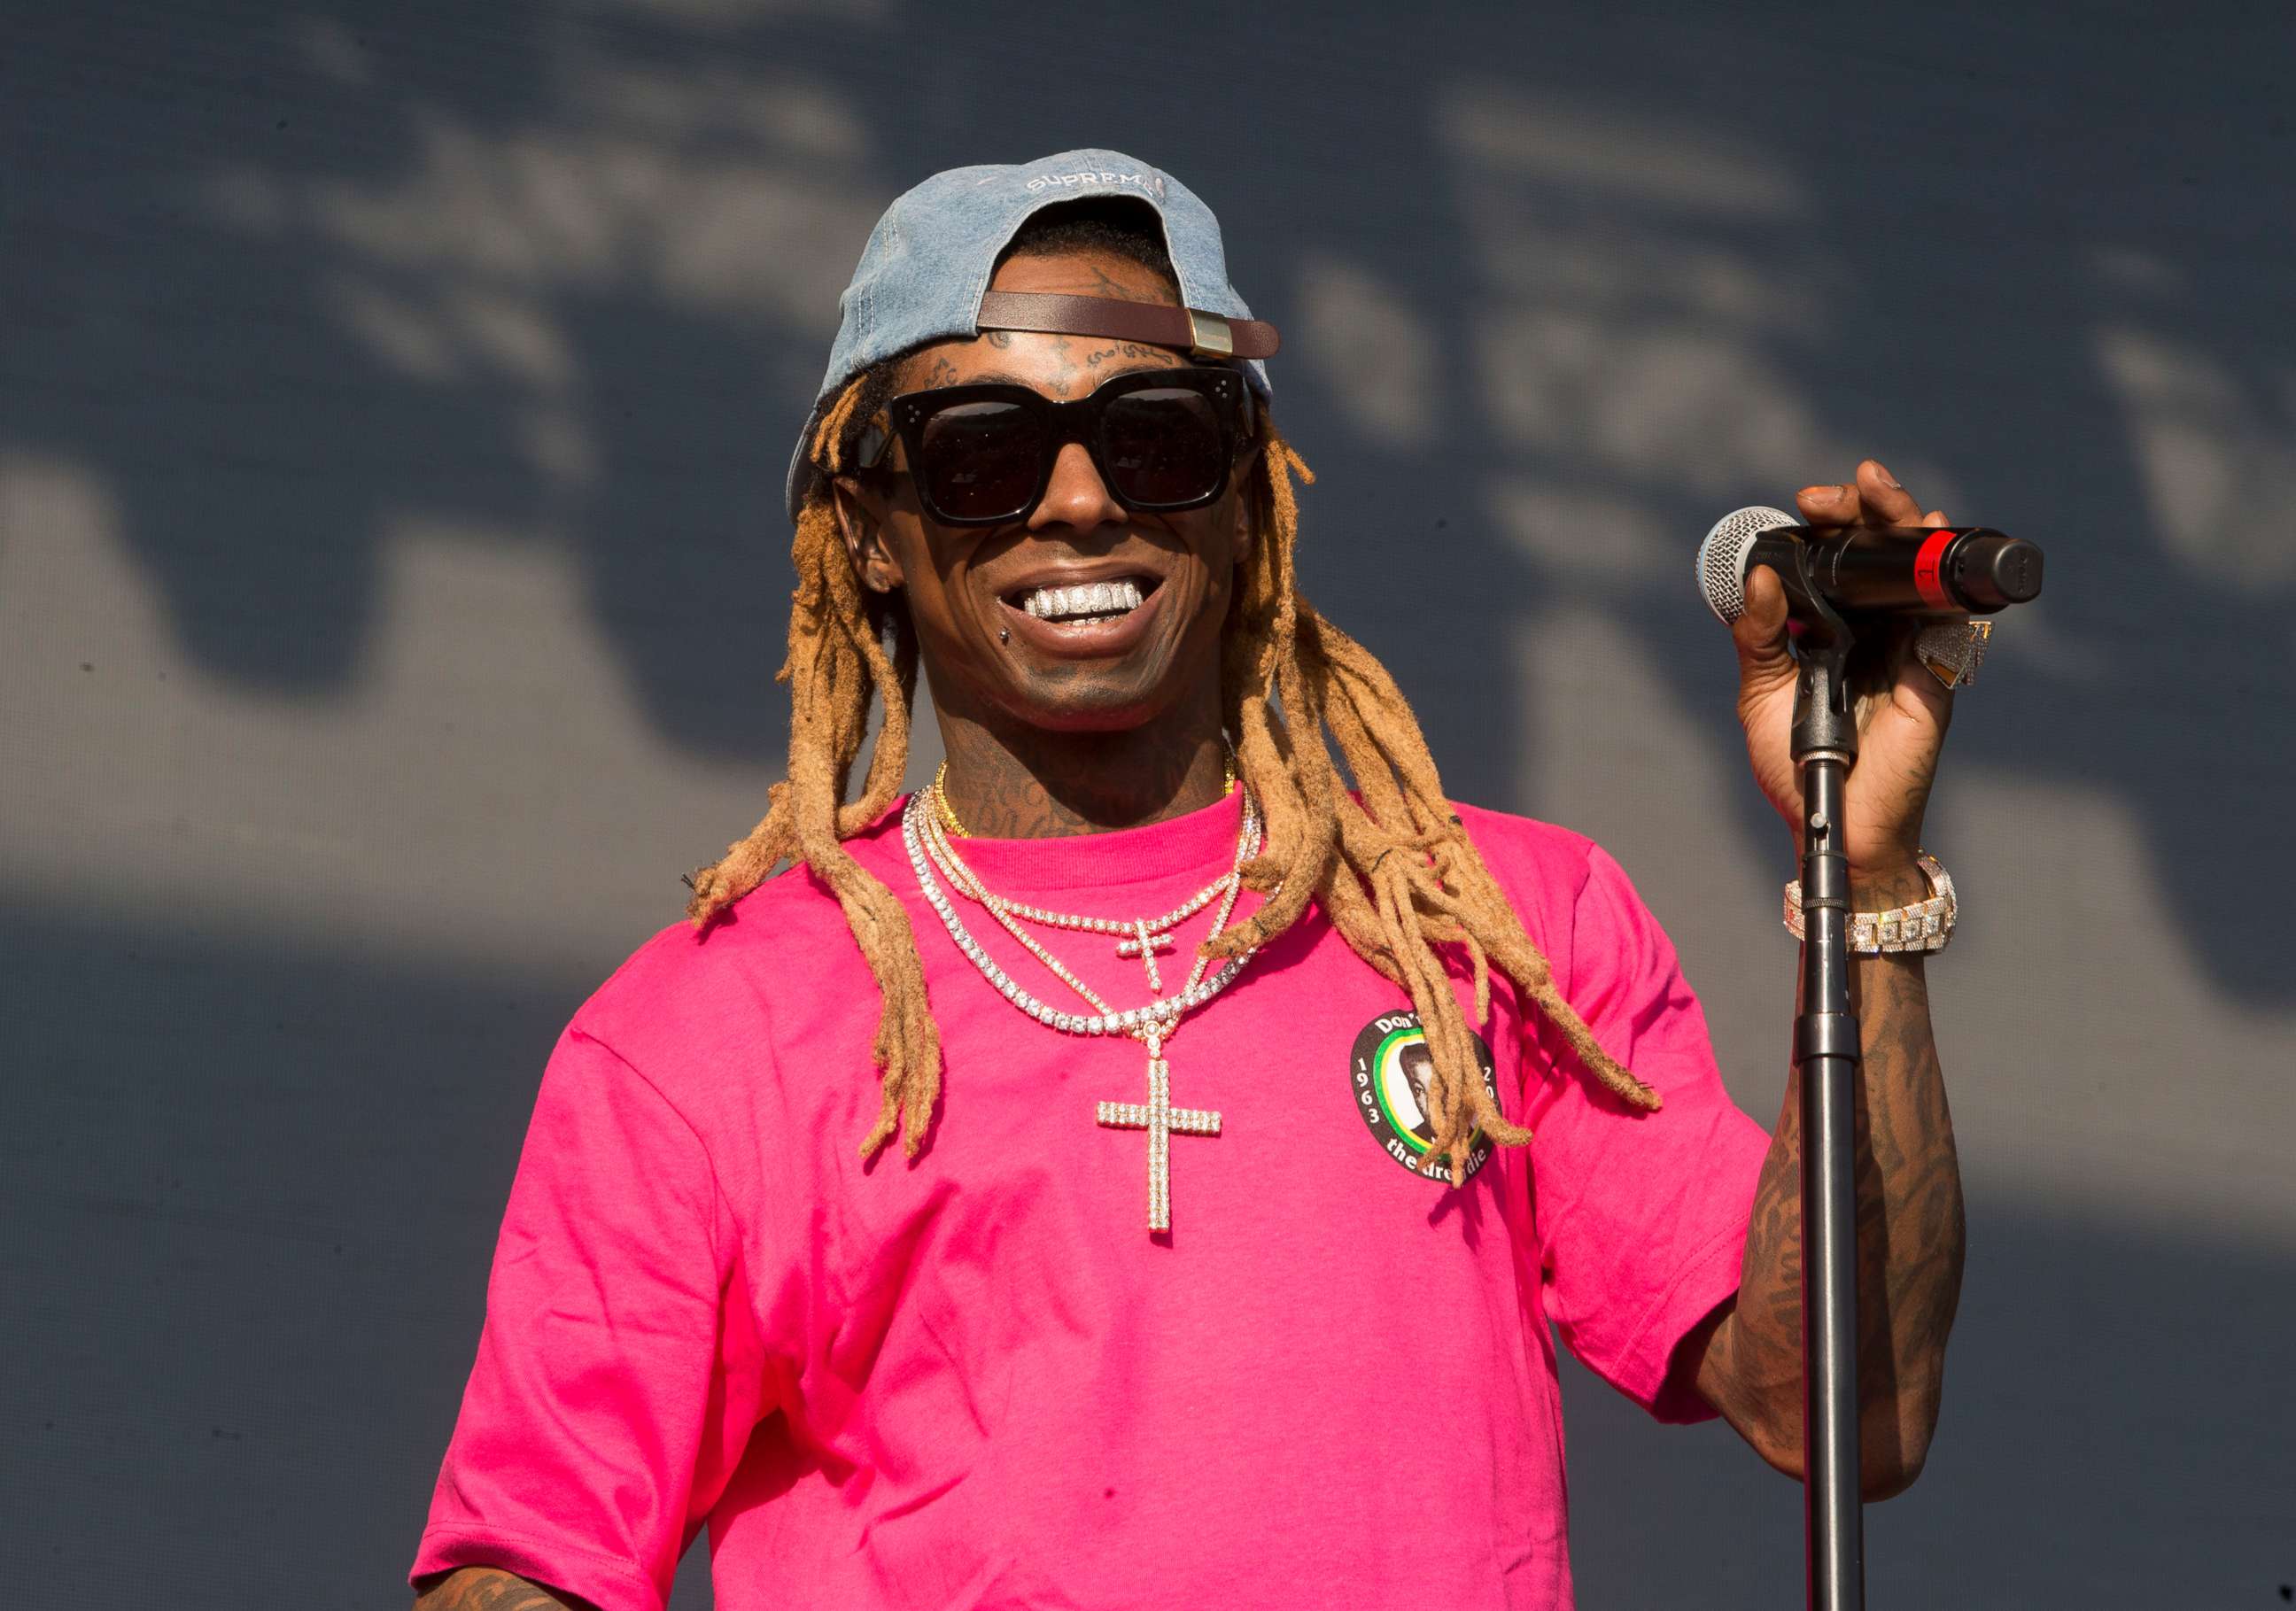 Lil Wayne arrested for possessing gun as convicted felon - ABC News